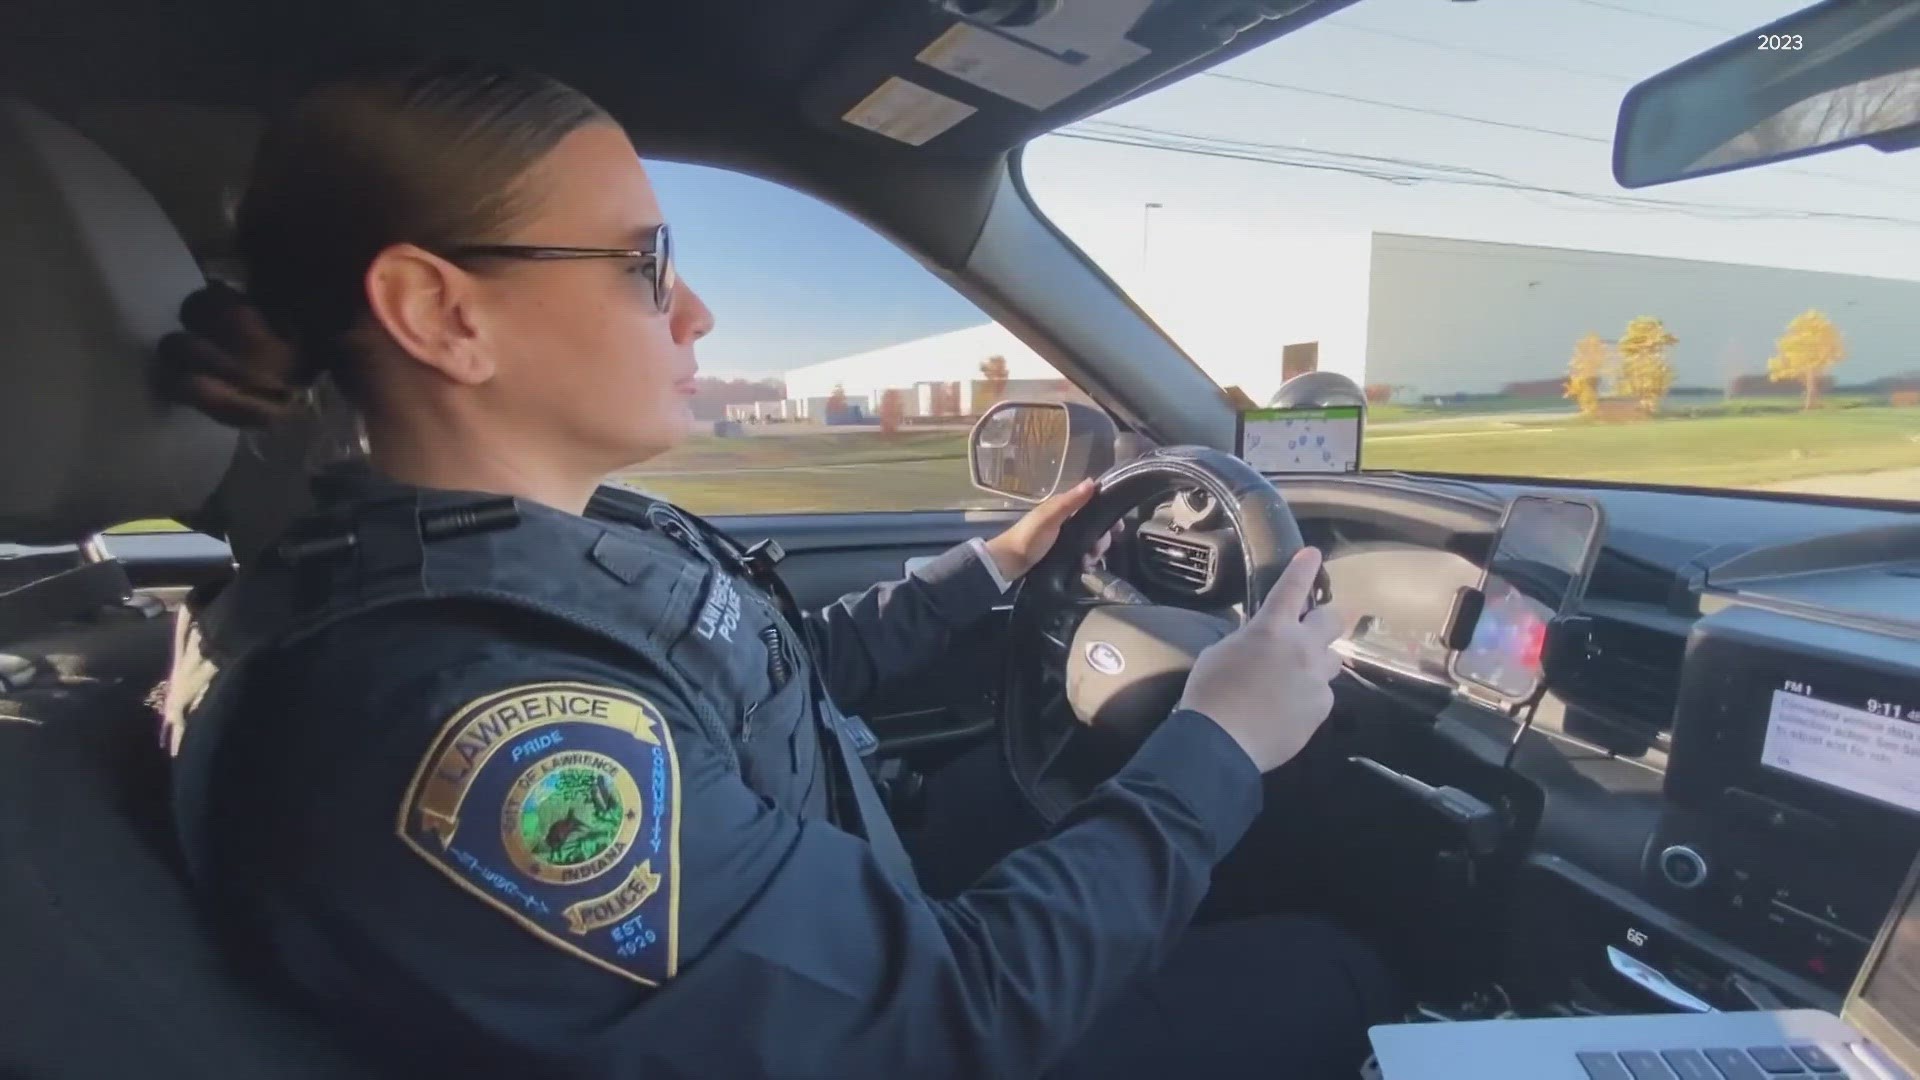 In Lawrence this week, we're taking a closer look at how the city is tackling a police officer shortage.